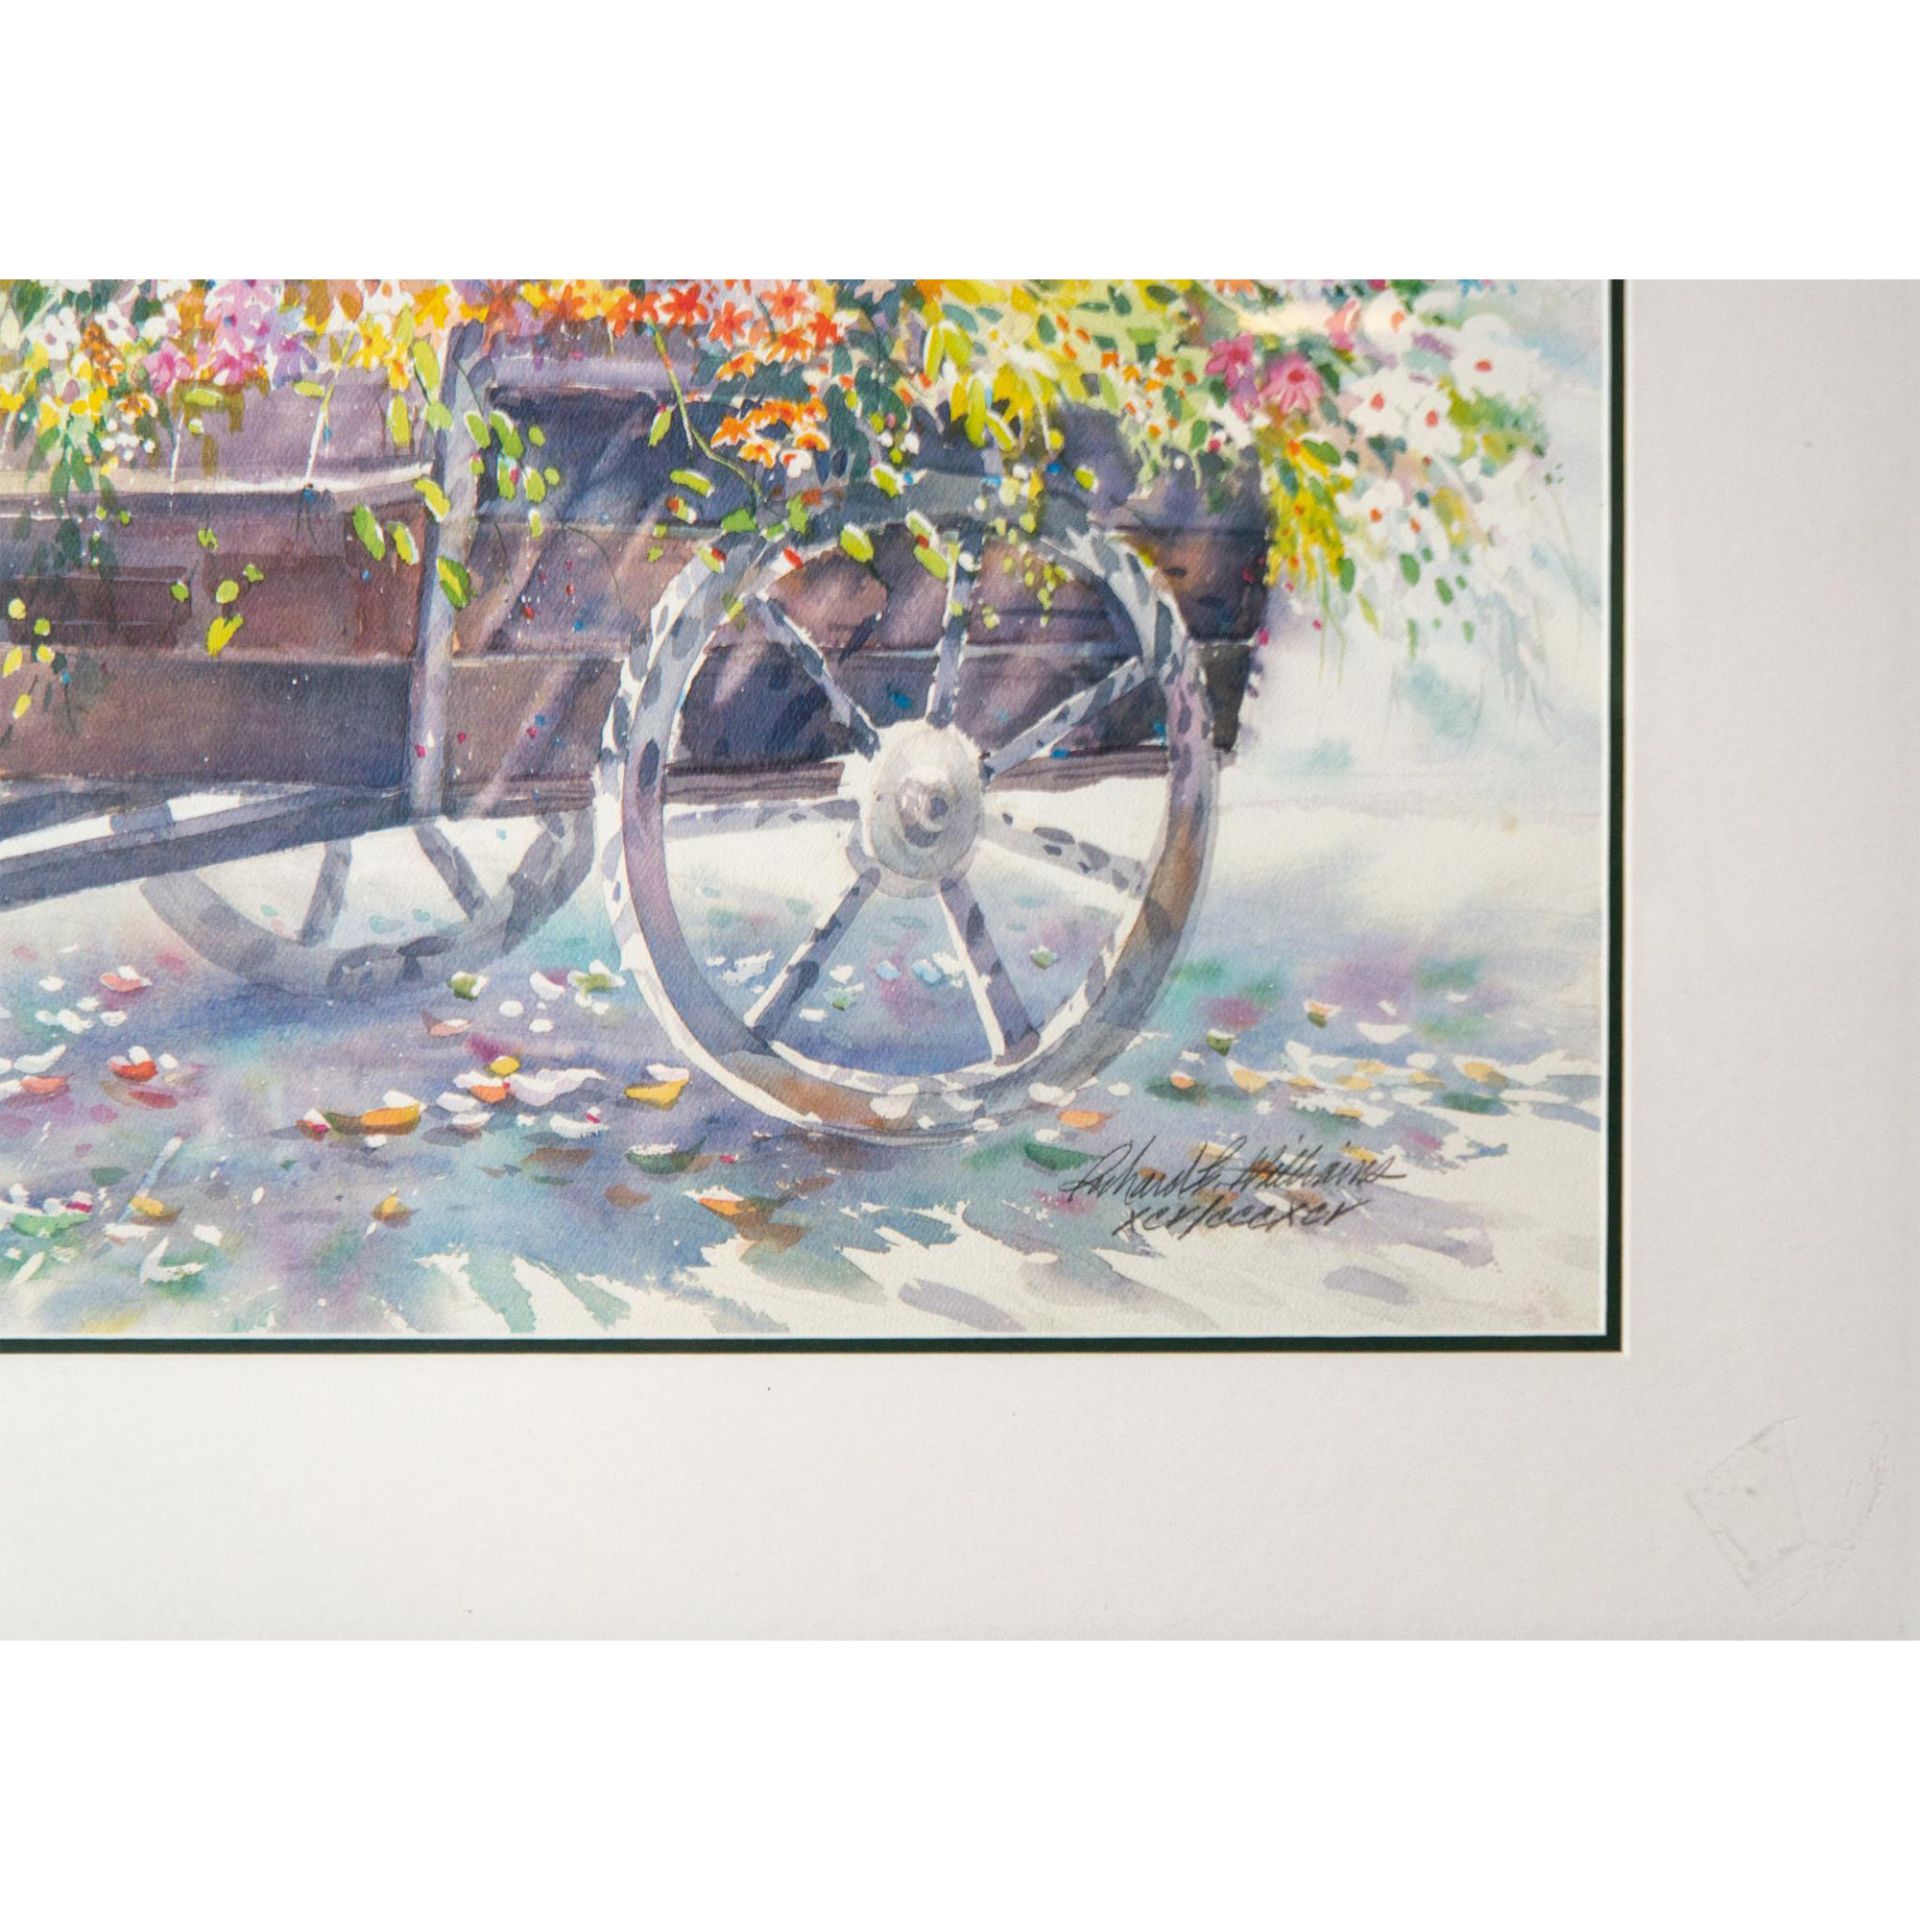 Richard Williams (American, 20th c) Lithograph, Flower Wagon - Image 3 of 5